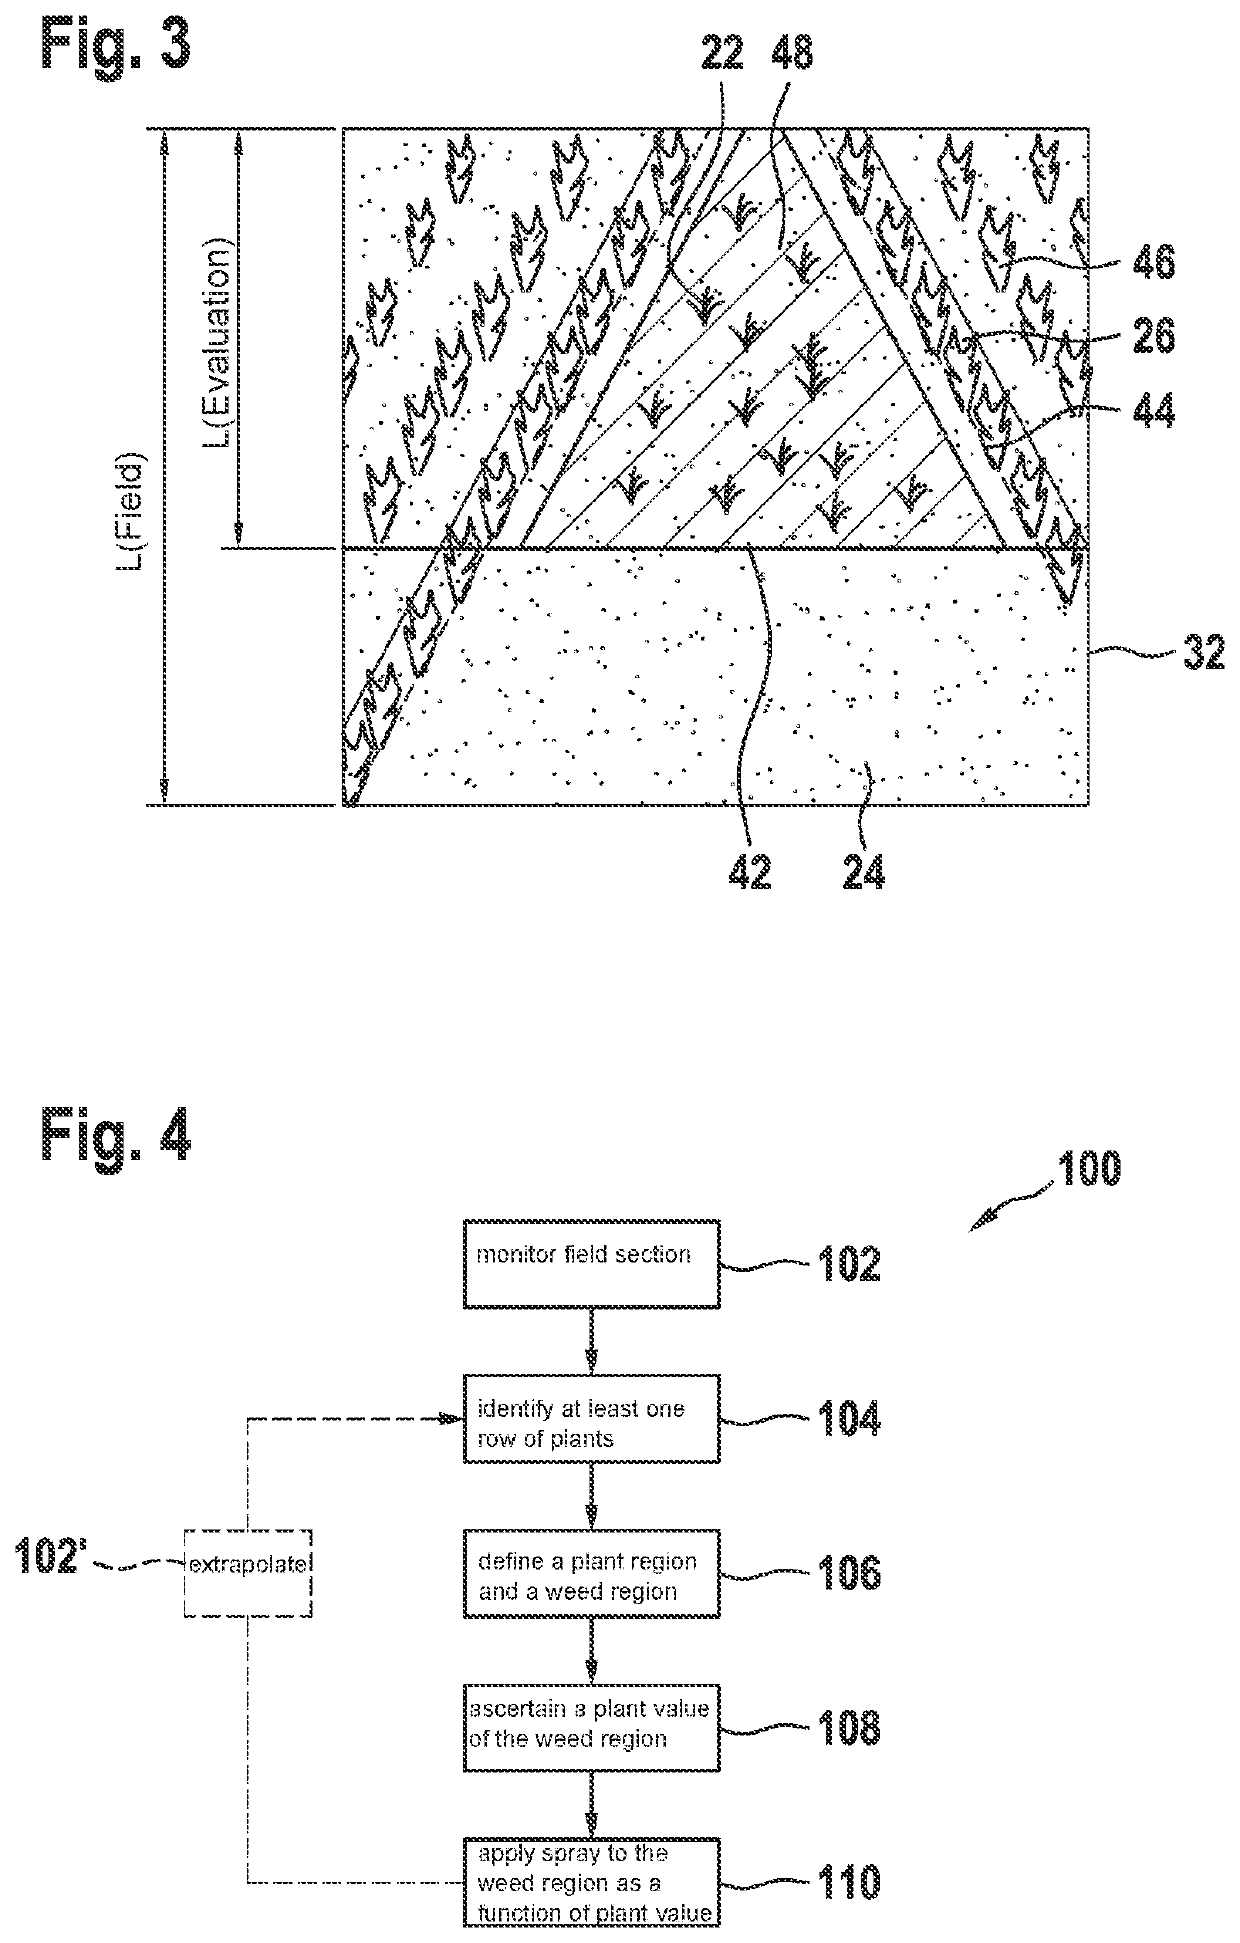 Method for applying a spray to a field